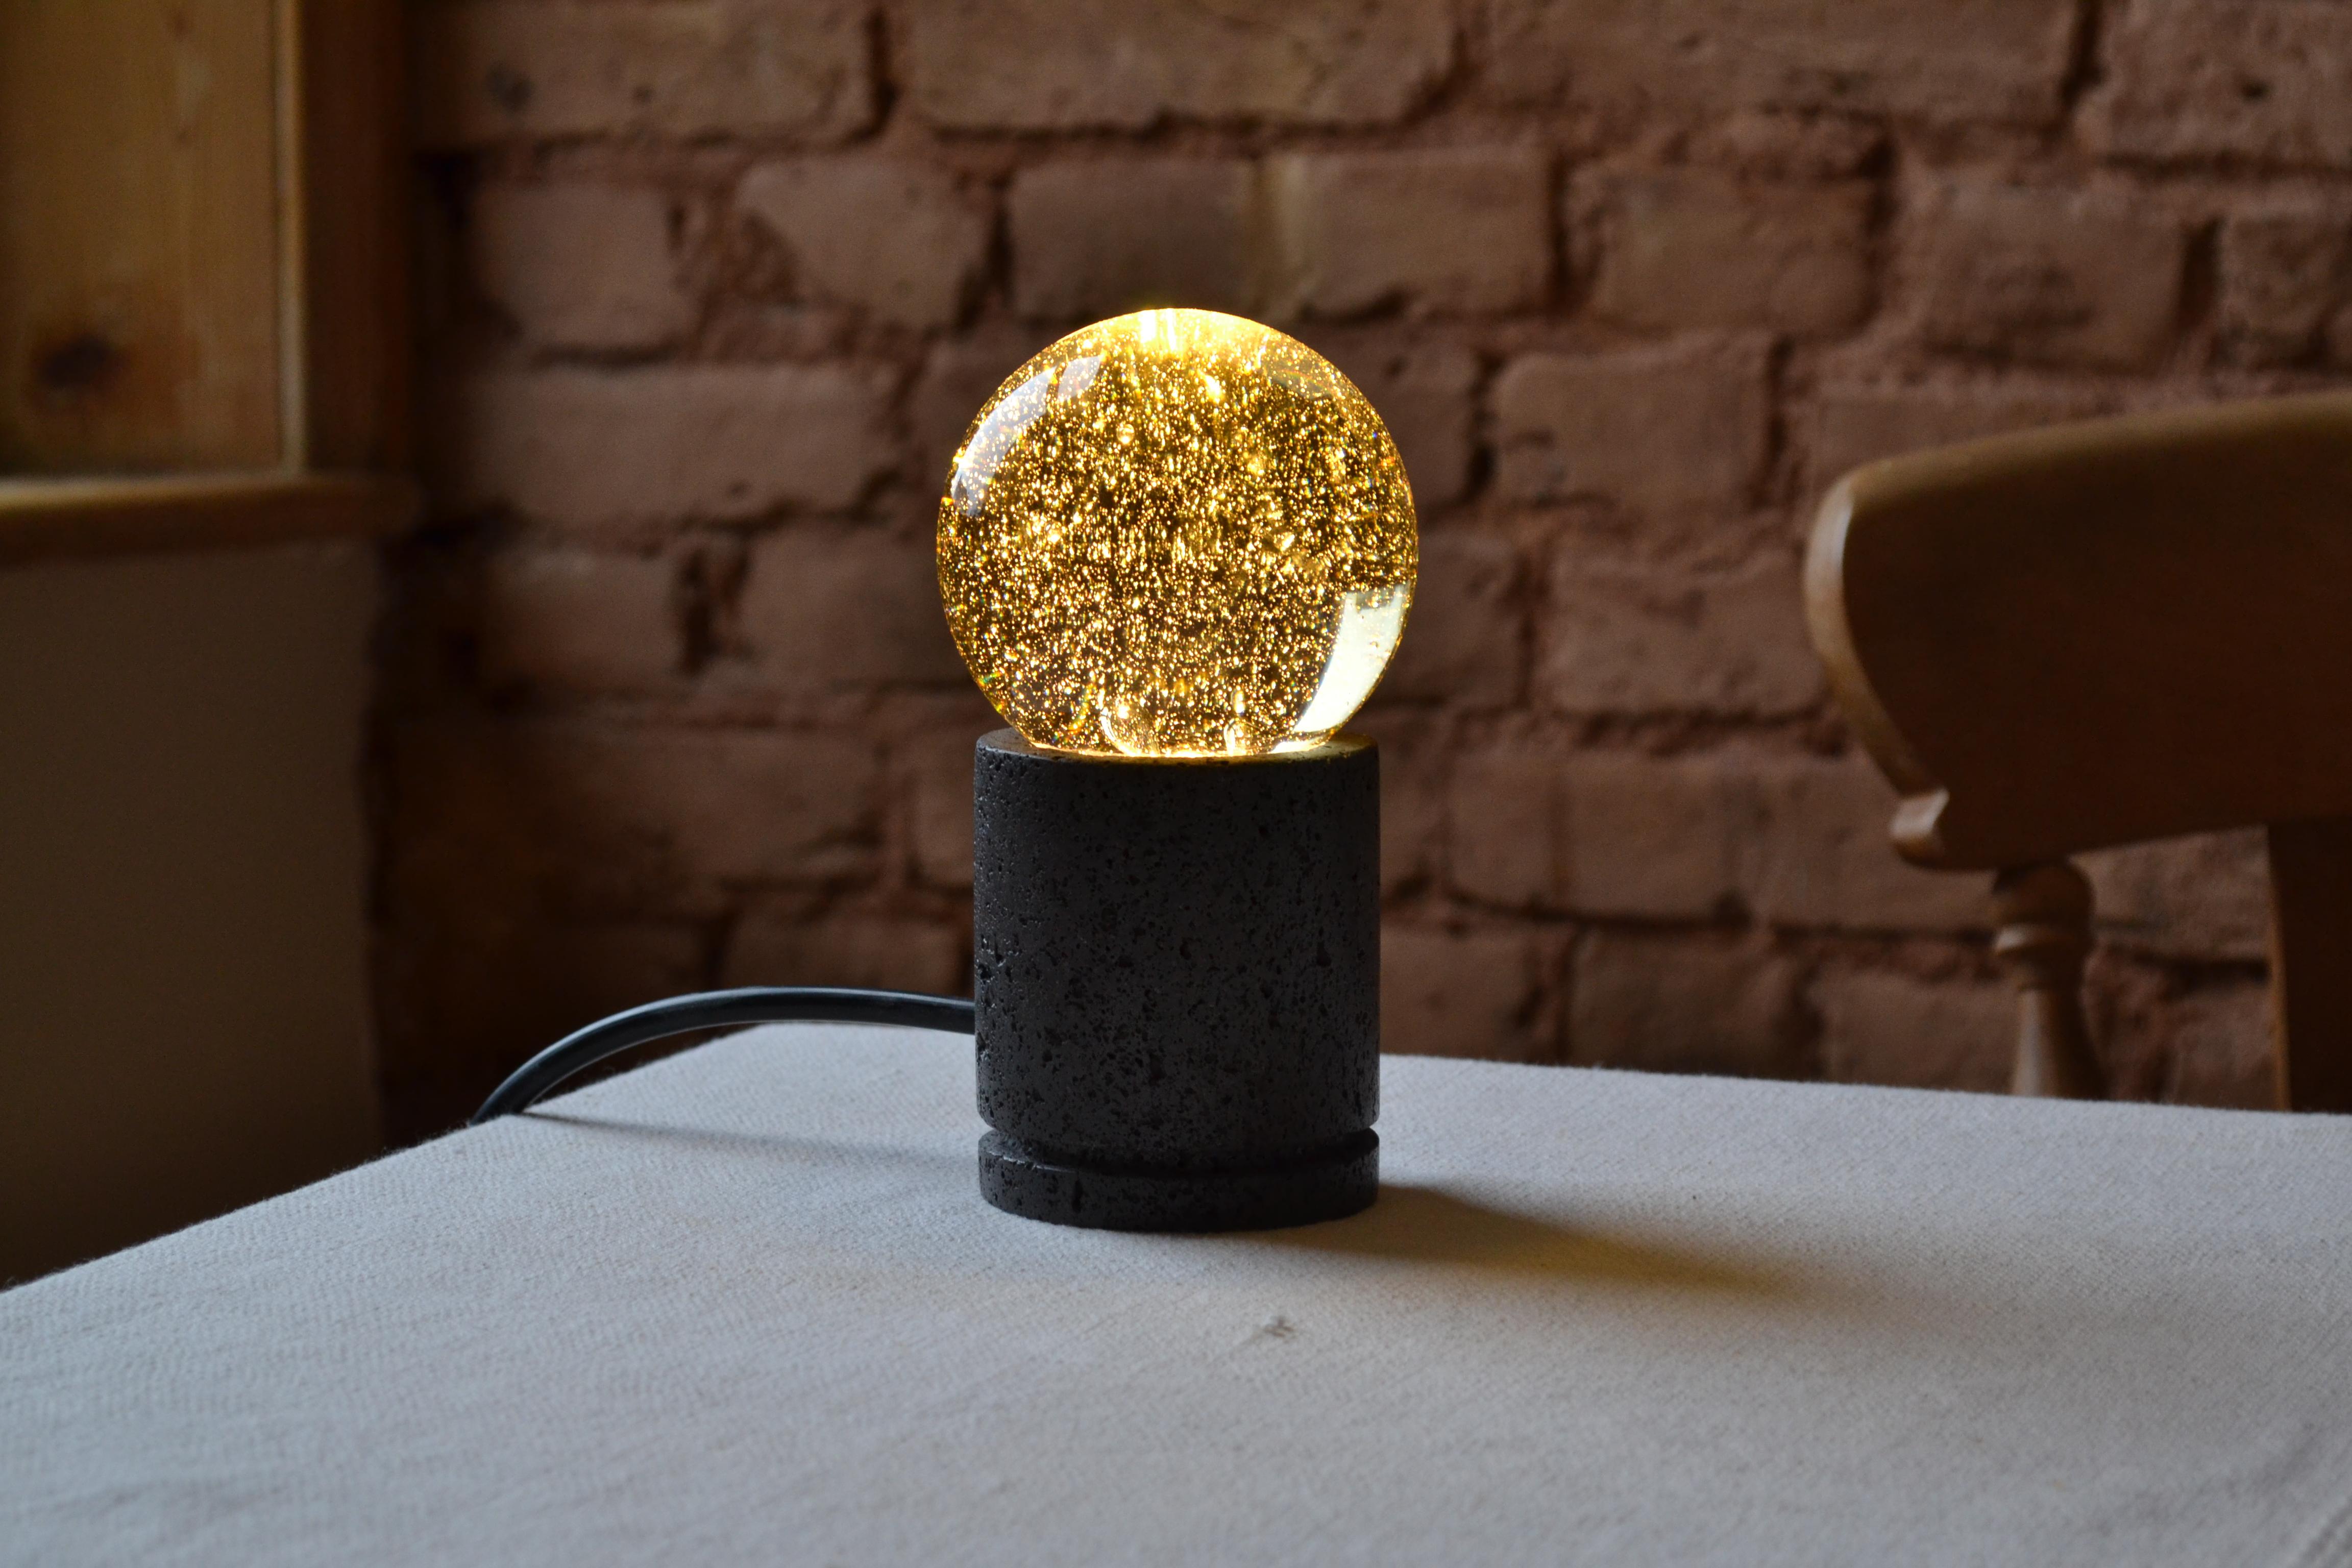 PLB lamp by Omar Ortiz, 2021
Dimensions: H8 x D16cm
Materials: Volcanic stone, handblown glass.

El Pedregal is a neighborhood south of Mexico City developed in the 1940s and its main developer was the famous Mexican architect Luis Barragán.The